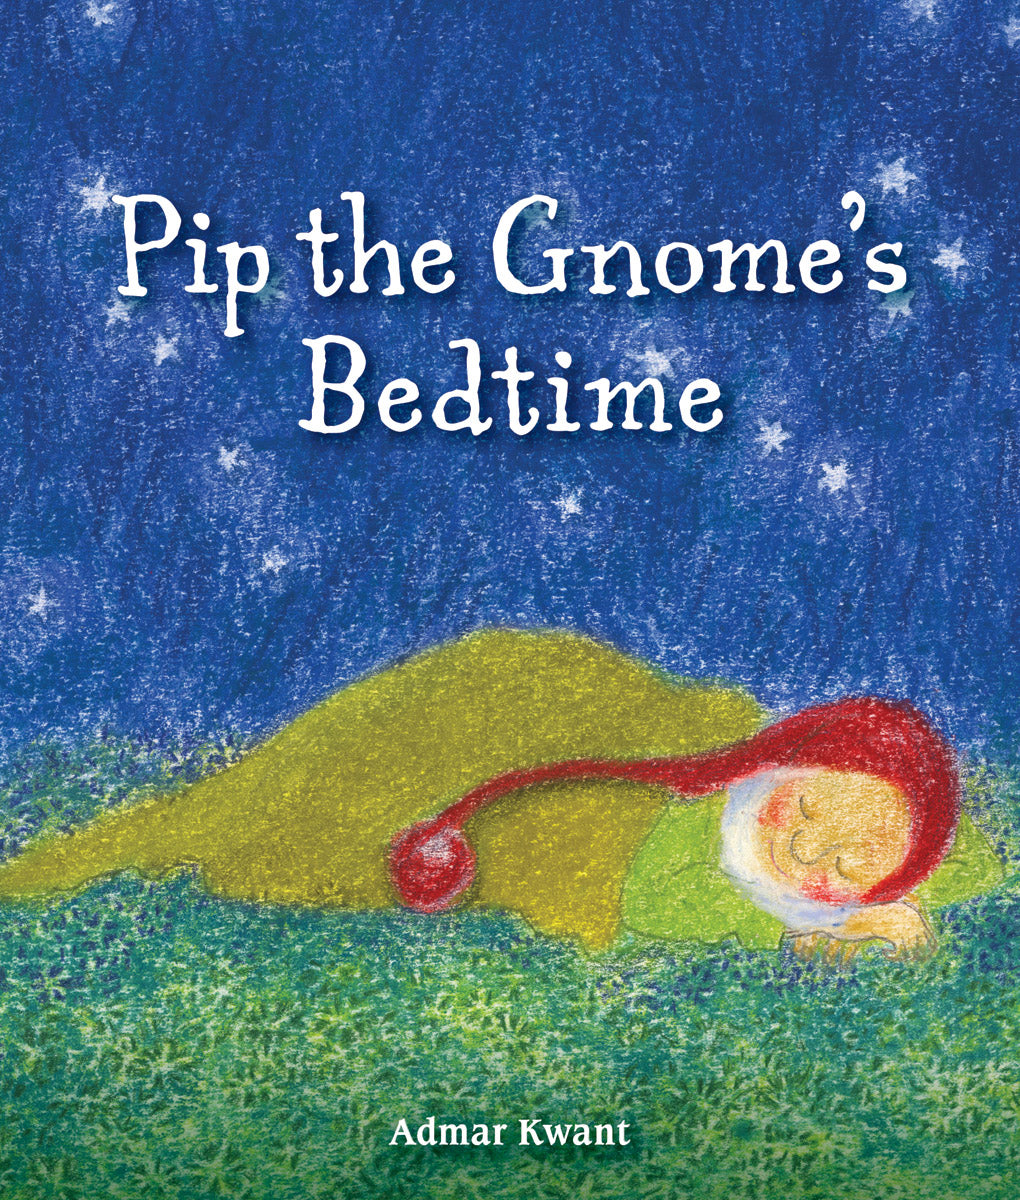 Pip the Gnome's Bedtime by Admar Kwant